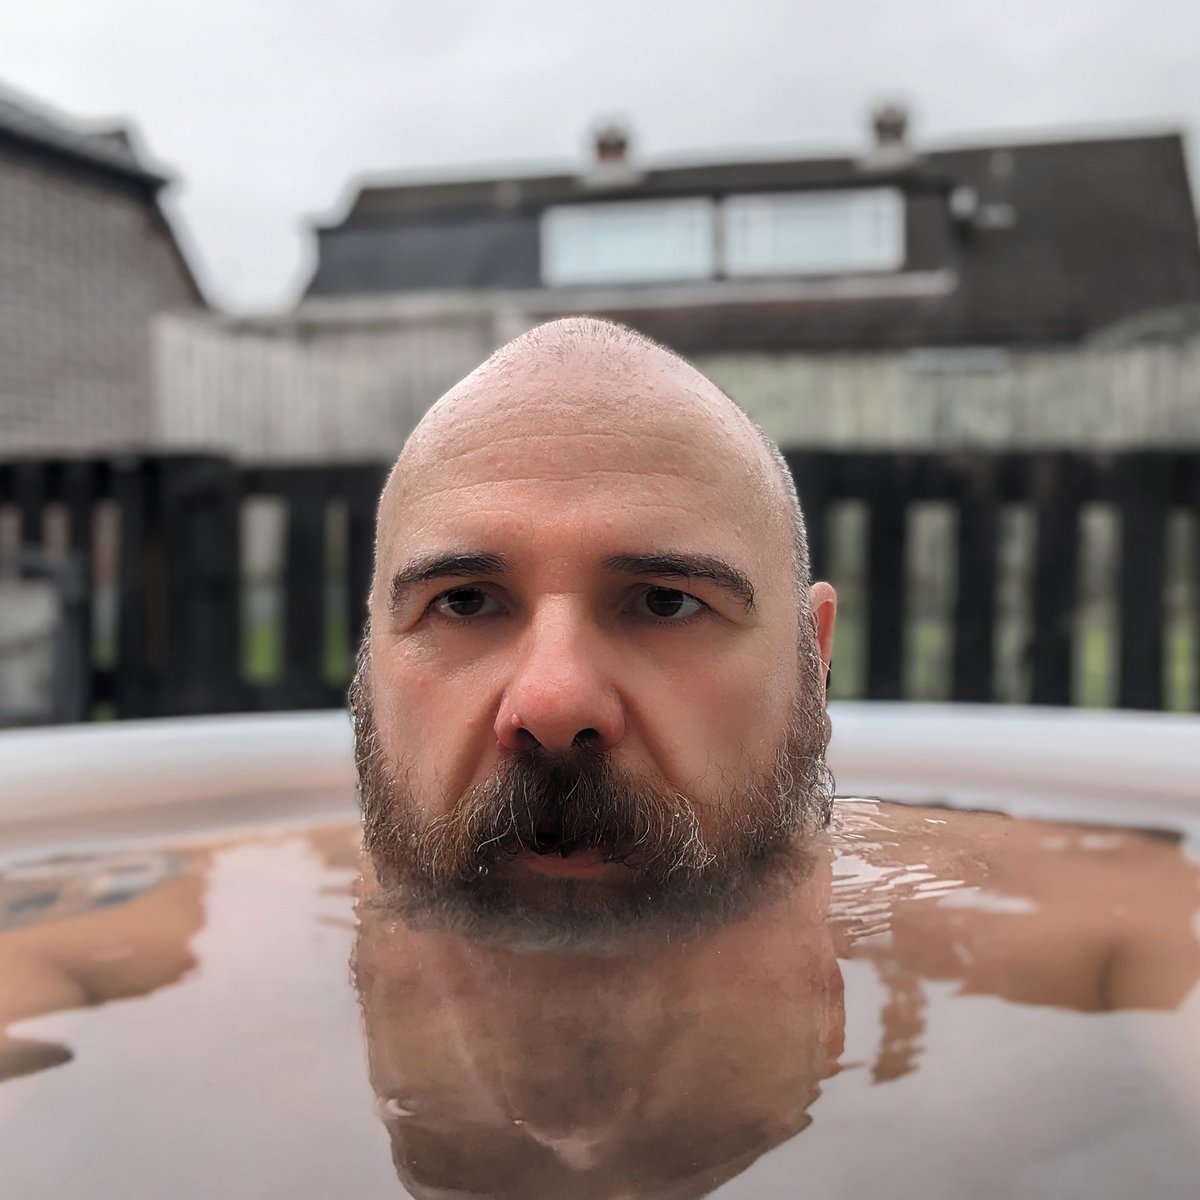 #coldwaterchallenge raising funds and awareness for @CR_UK cold water immersion every day in march - day 3 : 3mins 30 sec : 3° All donations greatly appreciated 👇👇👇 facebook.com/donate/1374079…